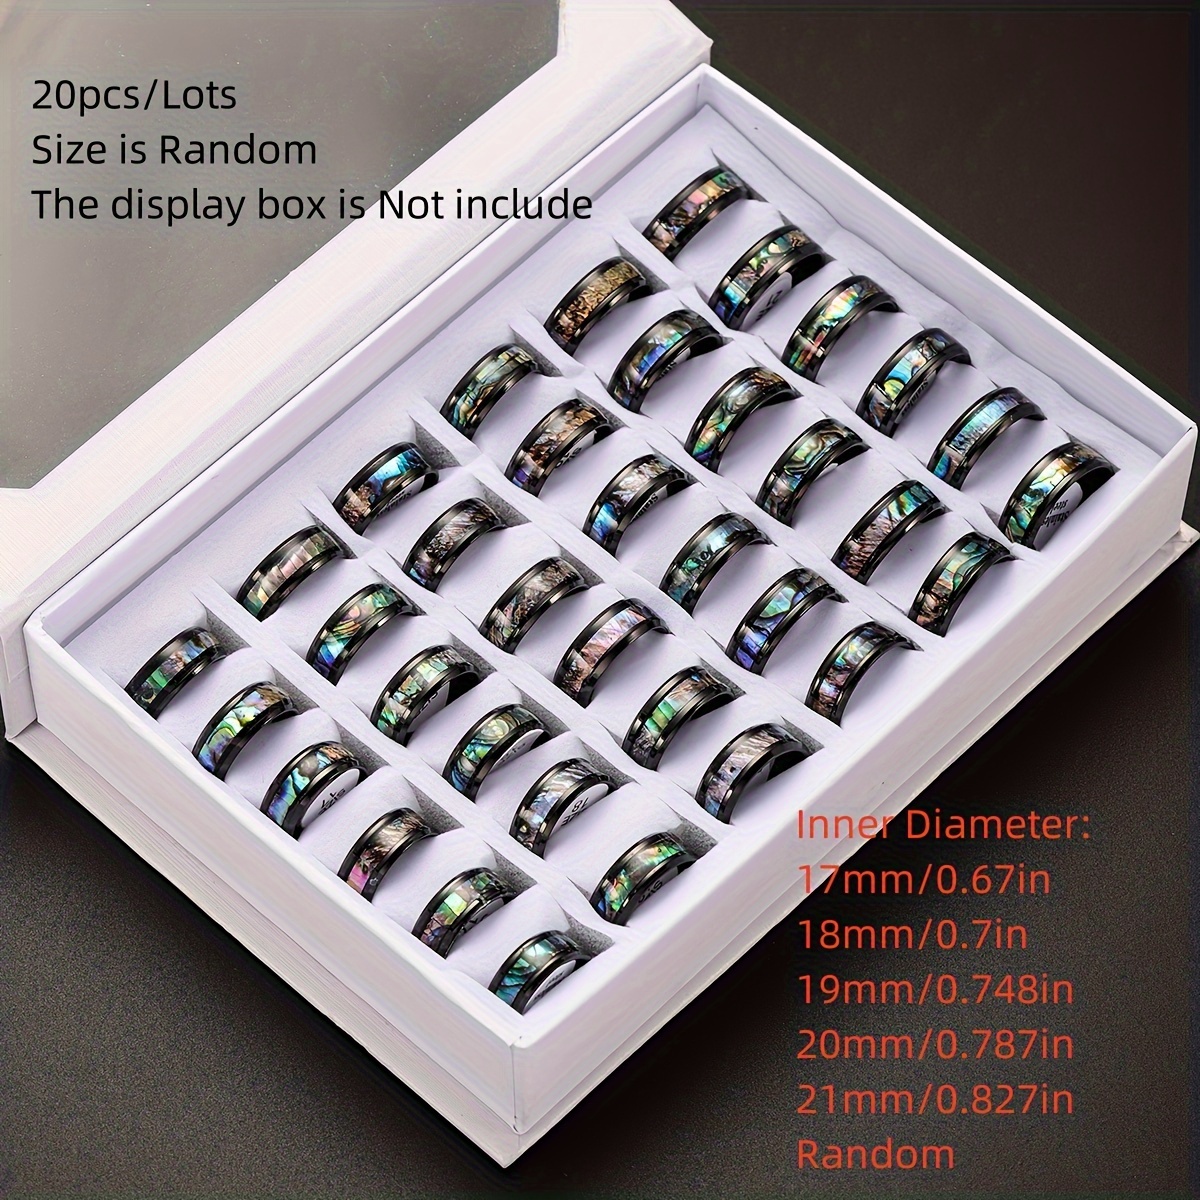 

20pcs Lot Fashionable Black Sparkling Natural Shell Stainless Steel Rings - Mix Style Wedding Party Finger Jewelry For Women Men - Random Size 17-21mm Box Is Not Include